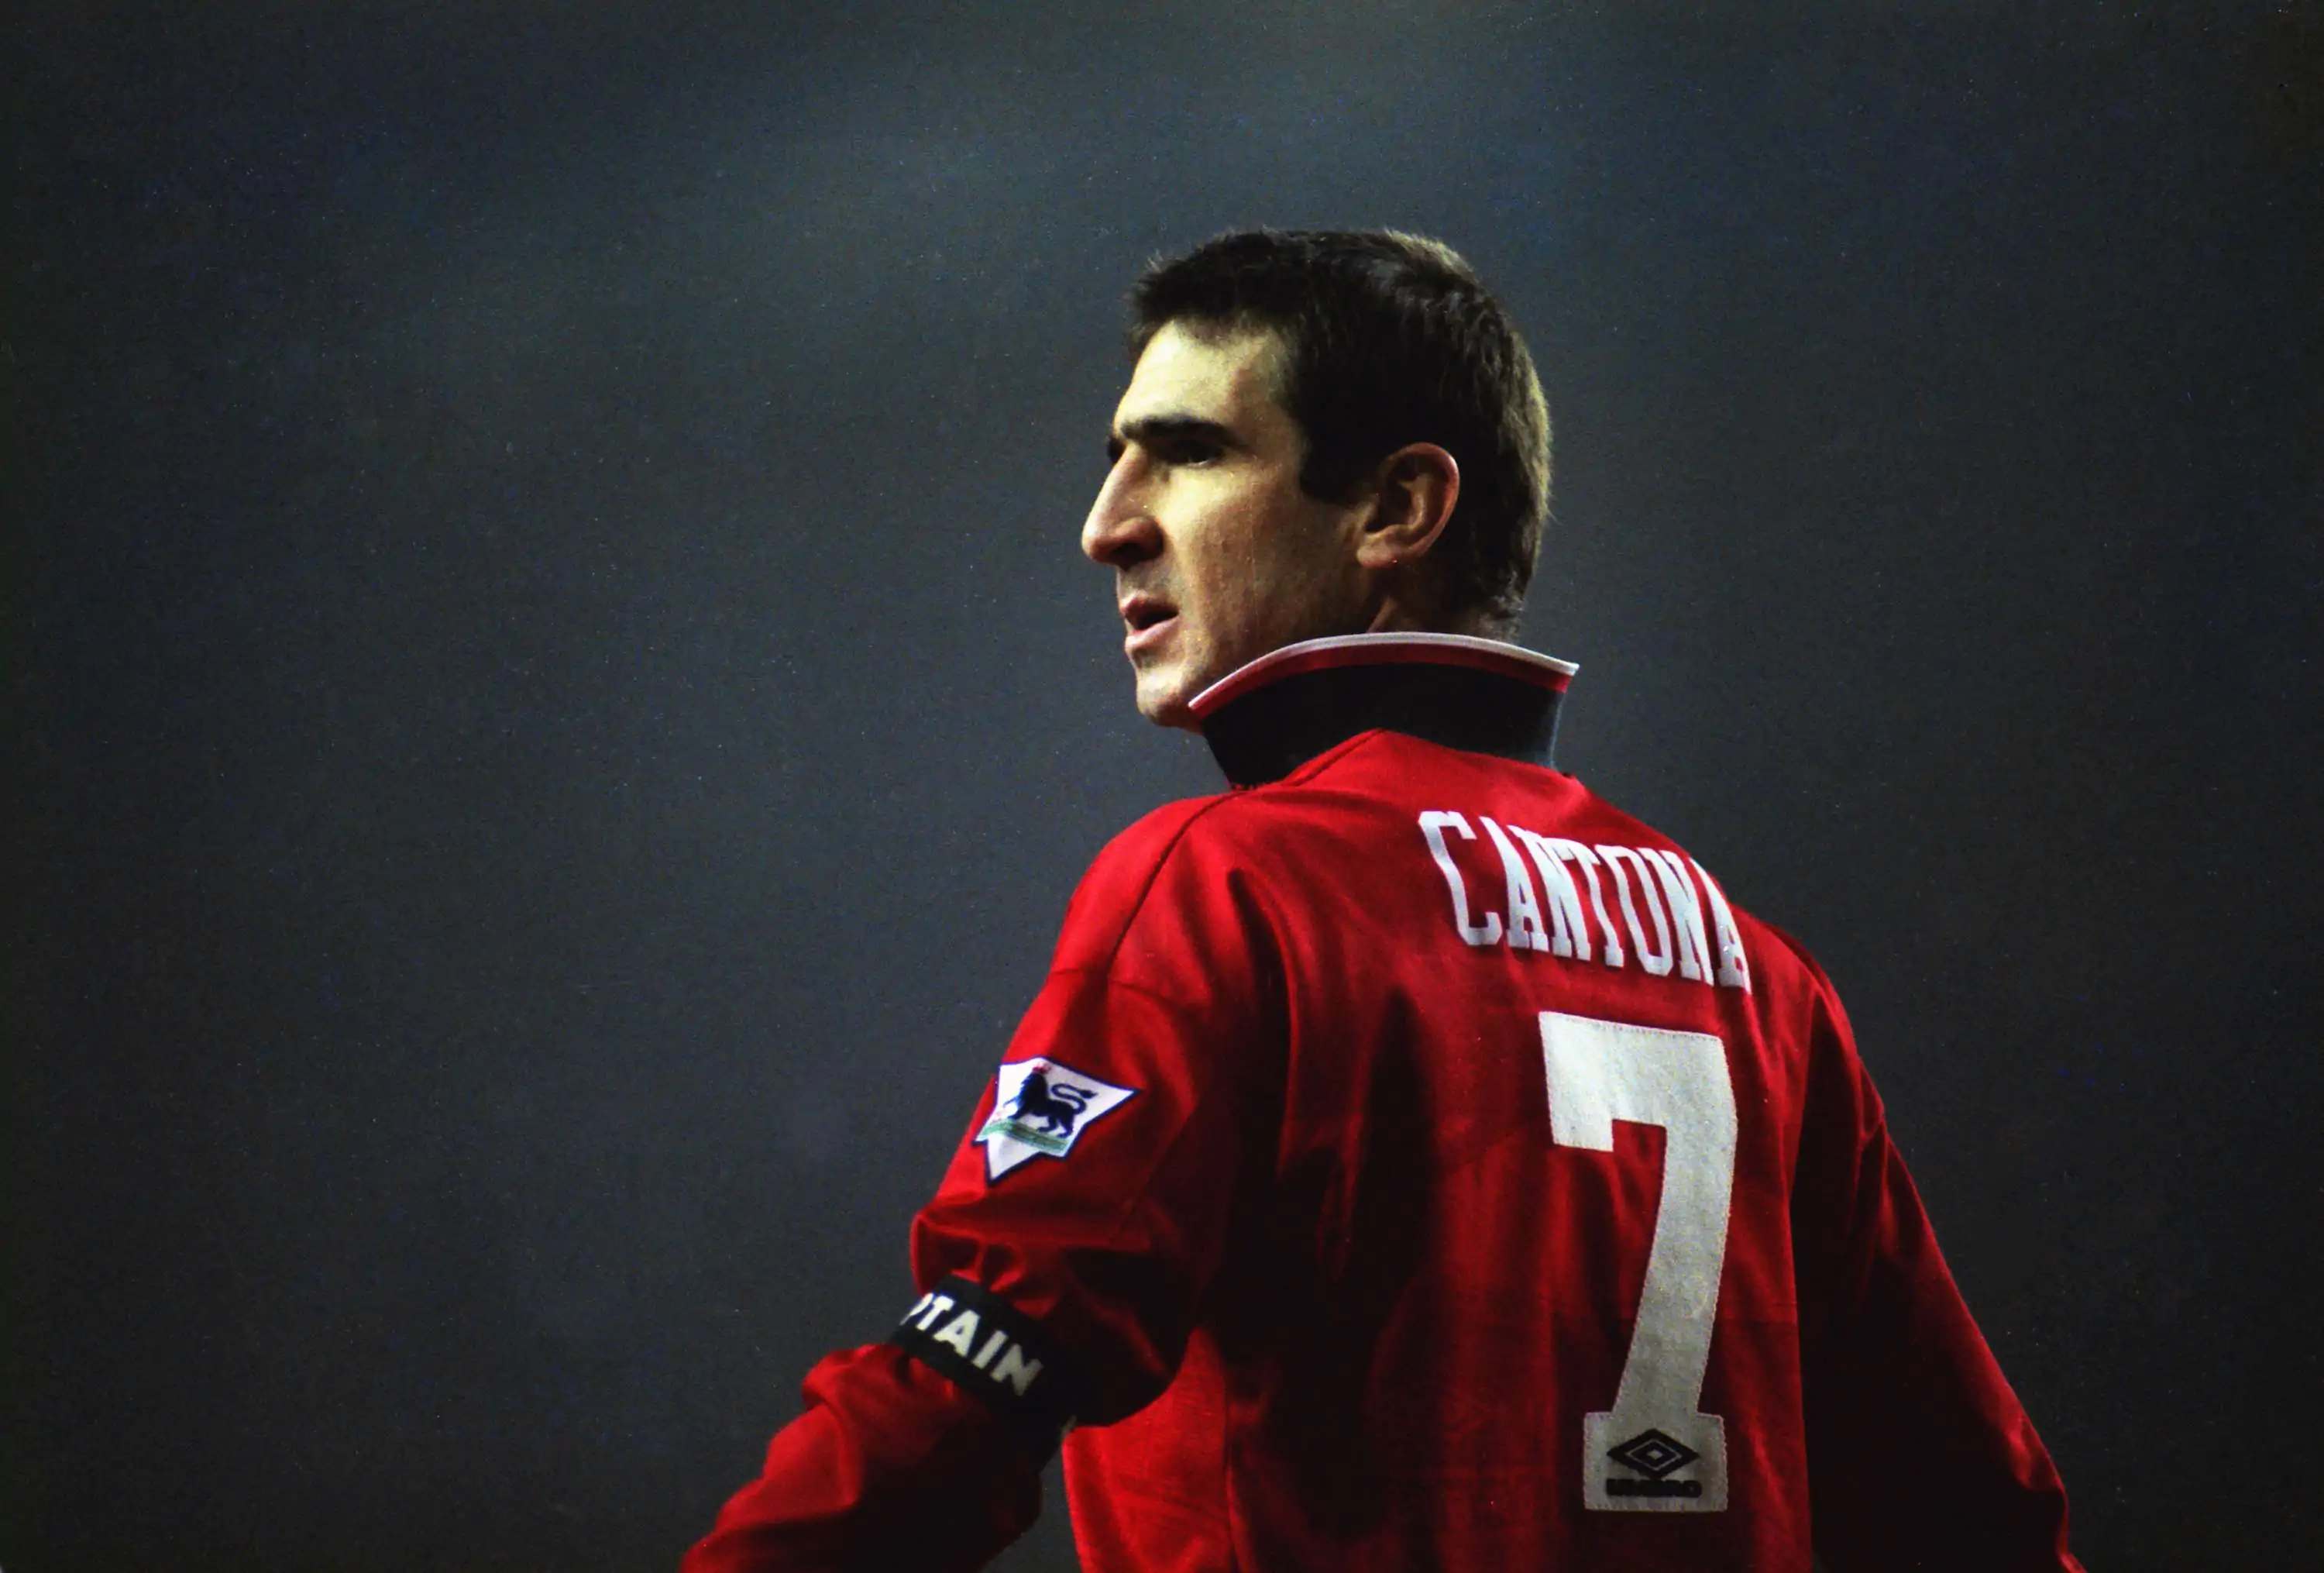 Eric Cantona Manchester United - The 13 Greatest Football Players Who Never Played in a FIFA World Cup